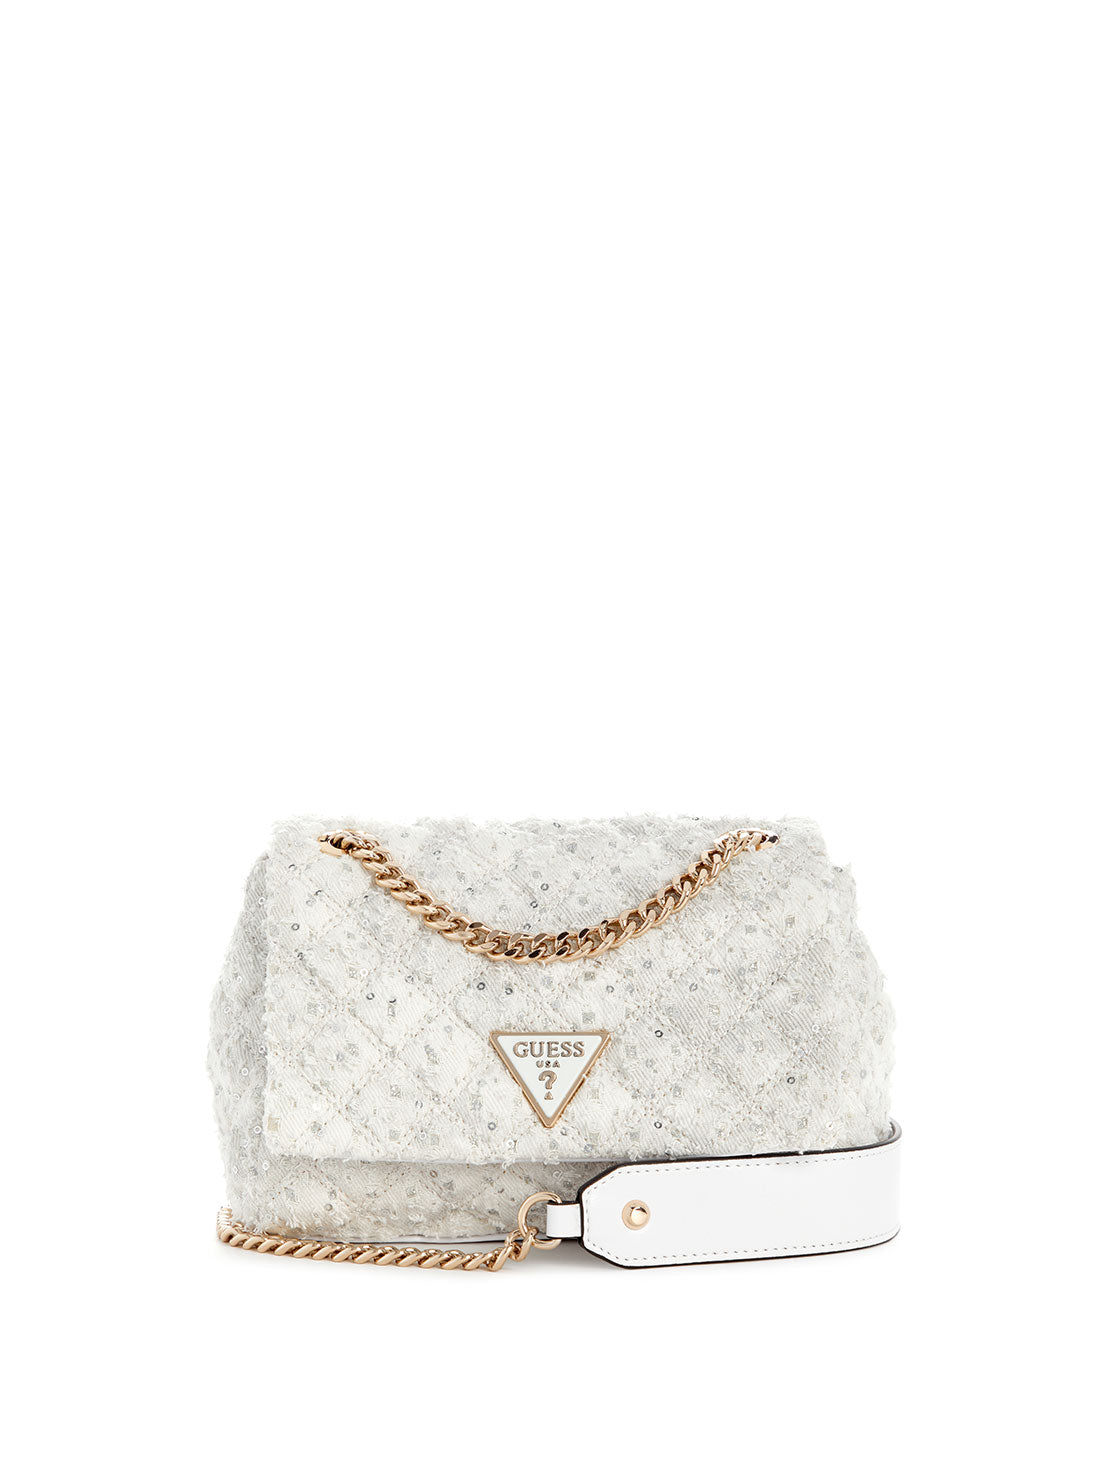 GUESS White Rianee Crossbody Flap Bag front view